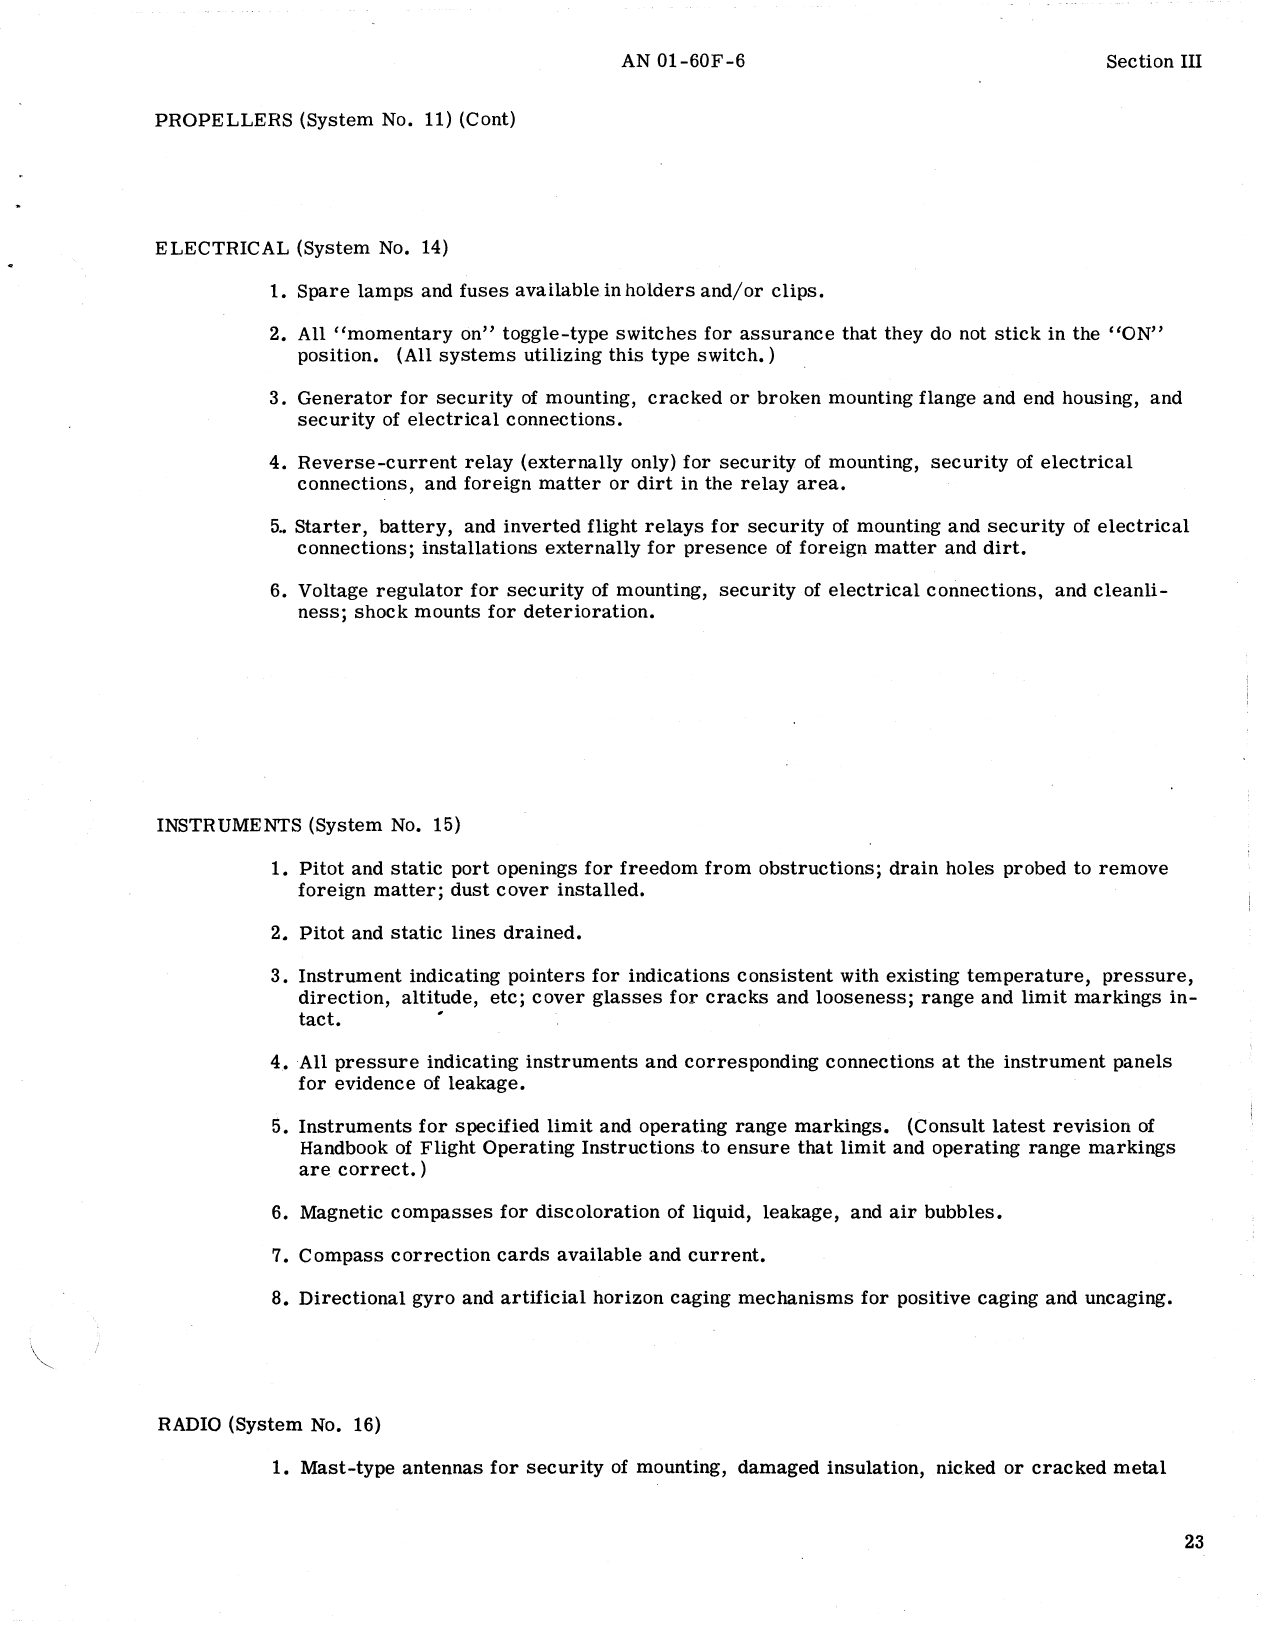 Sample page 25 from AirCorps Library document: Inspection Requirements T-6 / SNJ